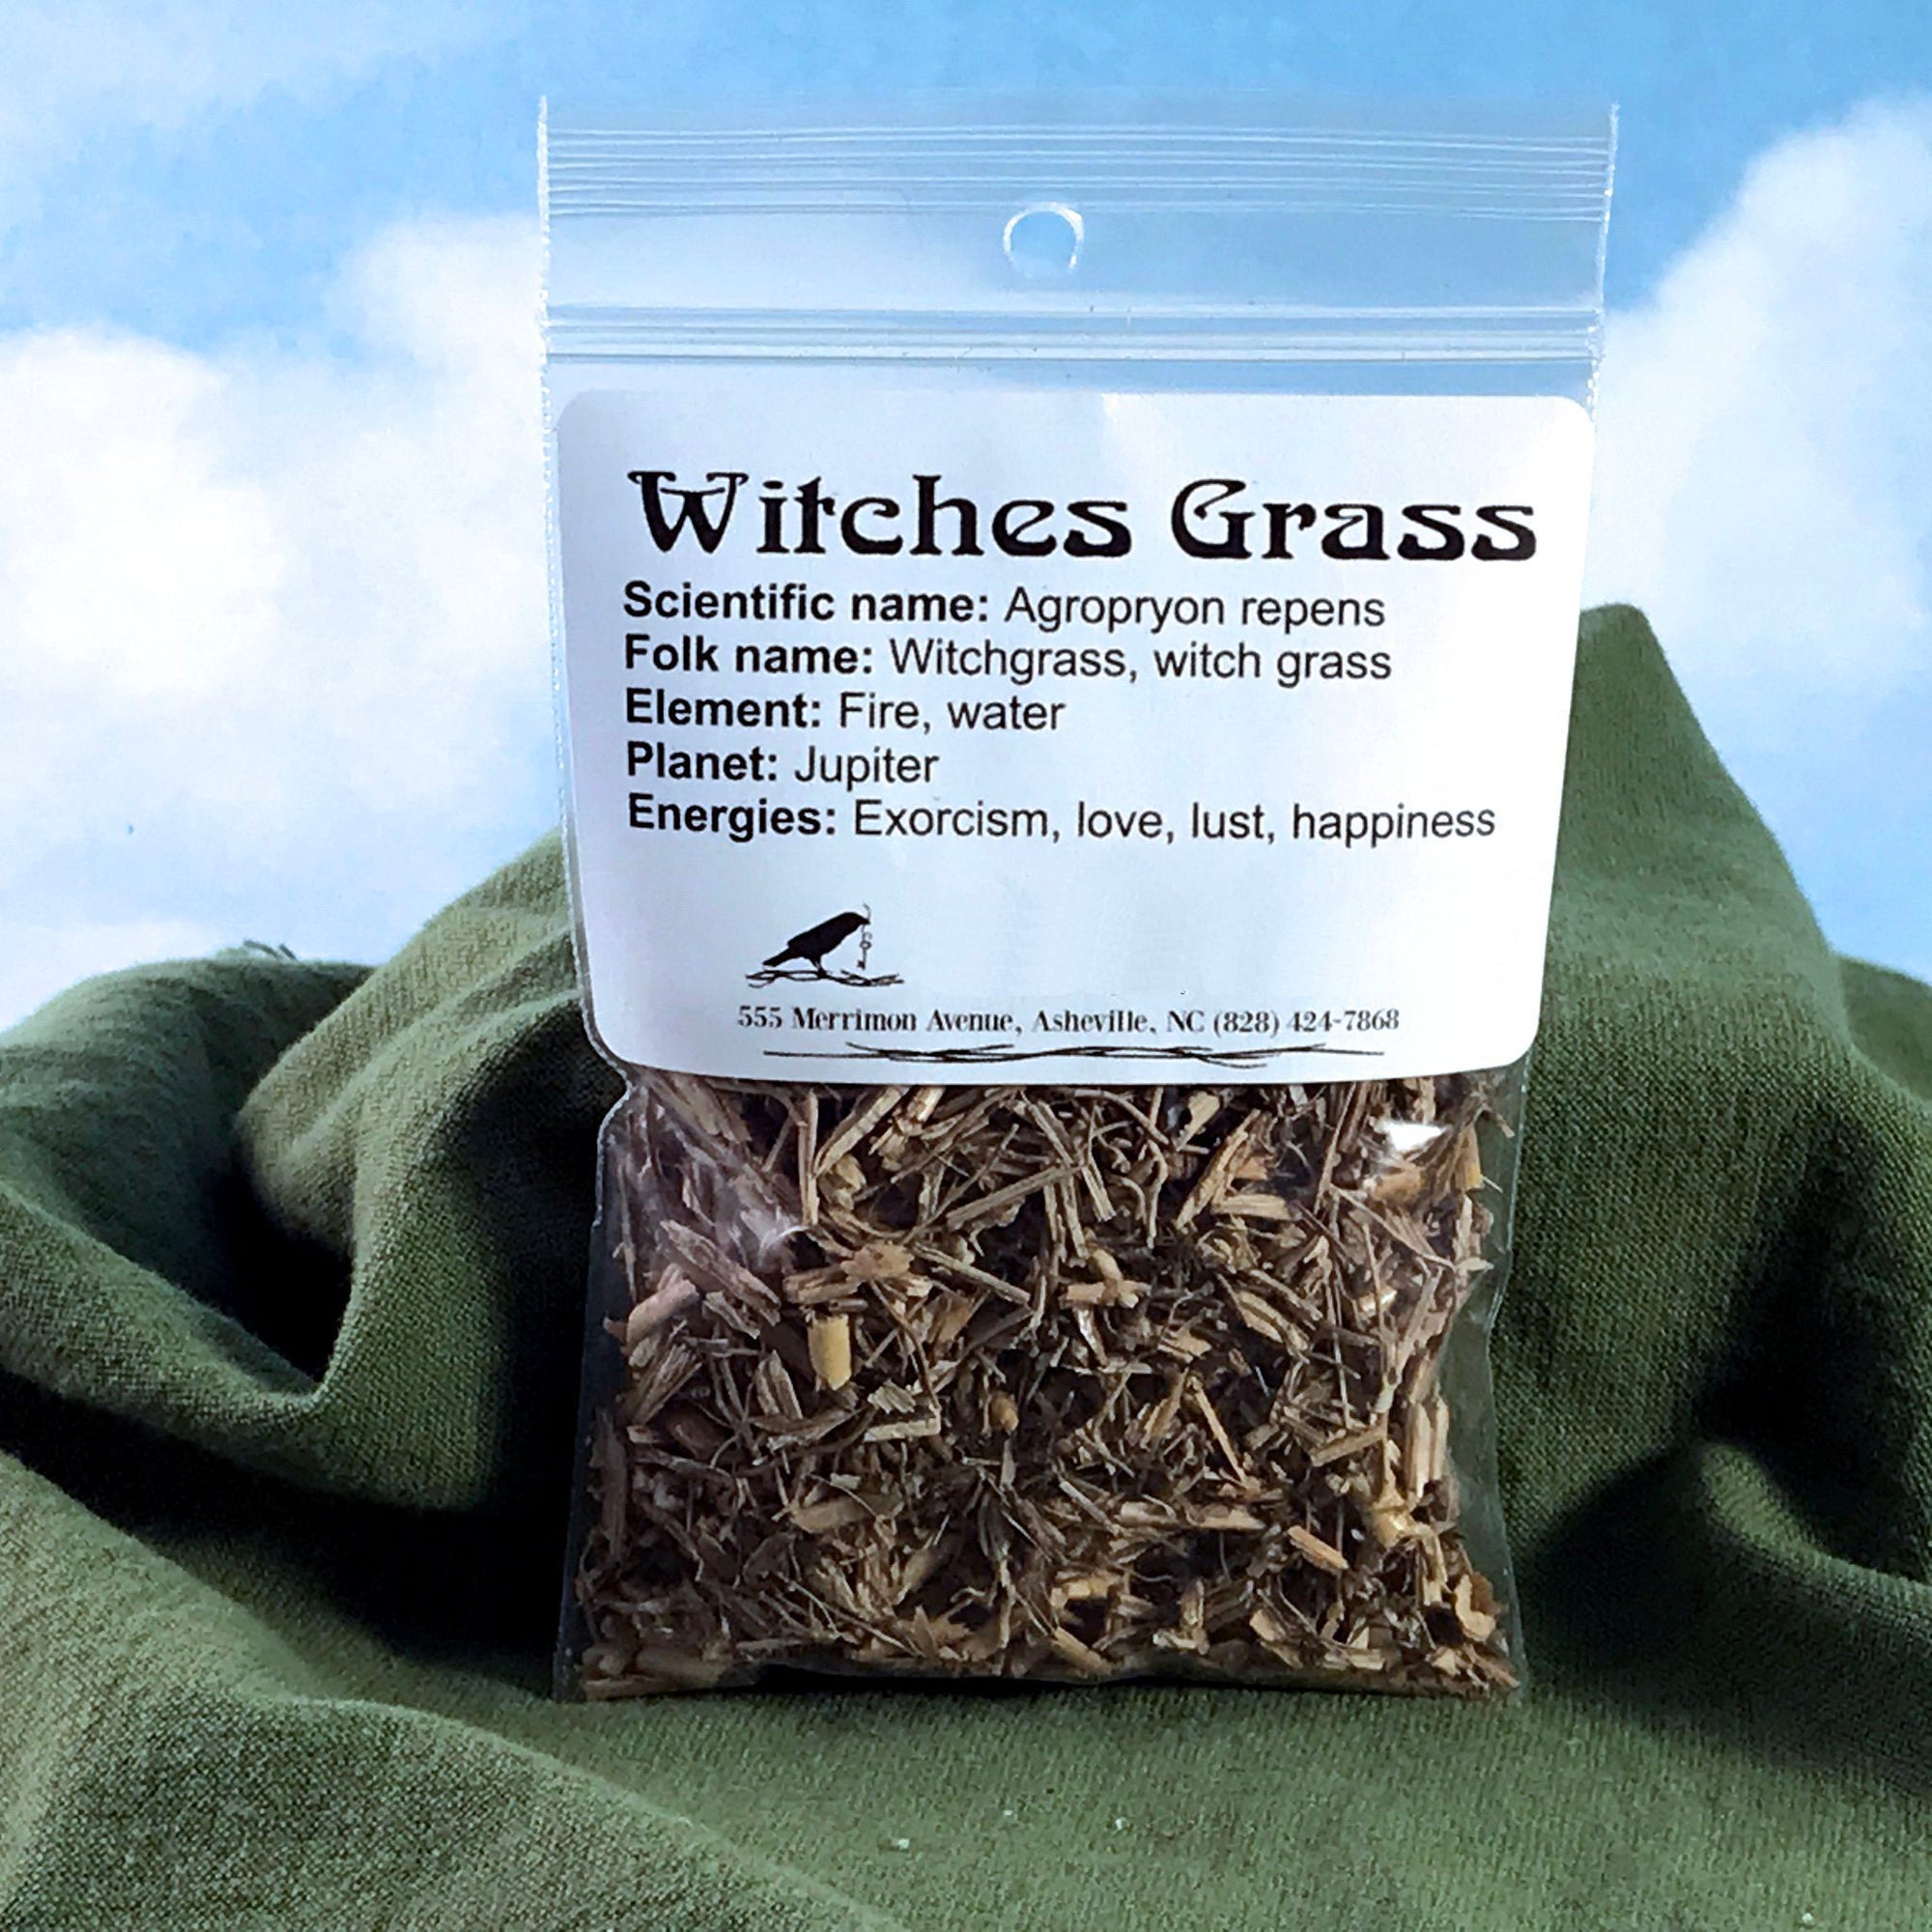 Witches Grass